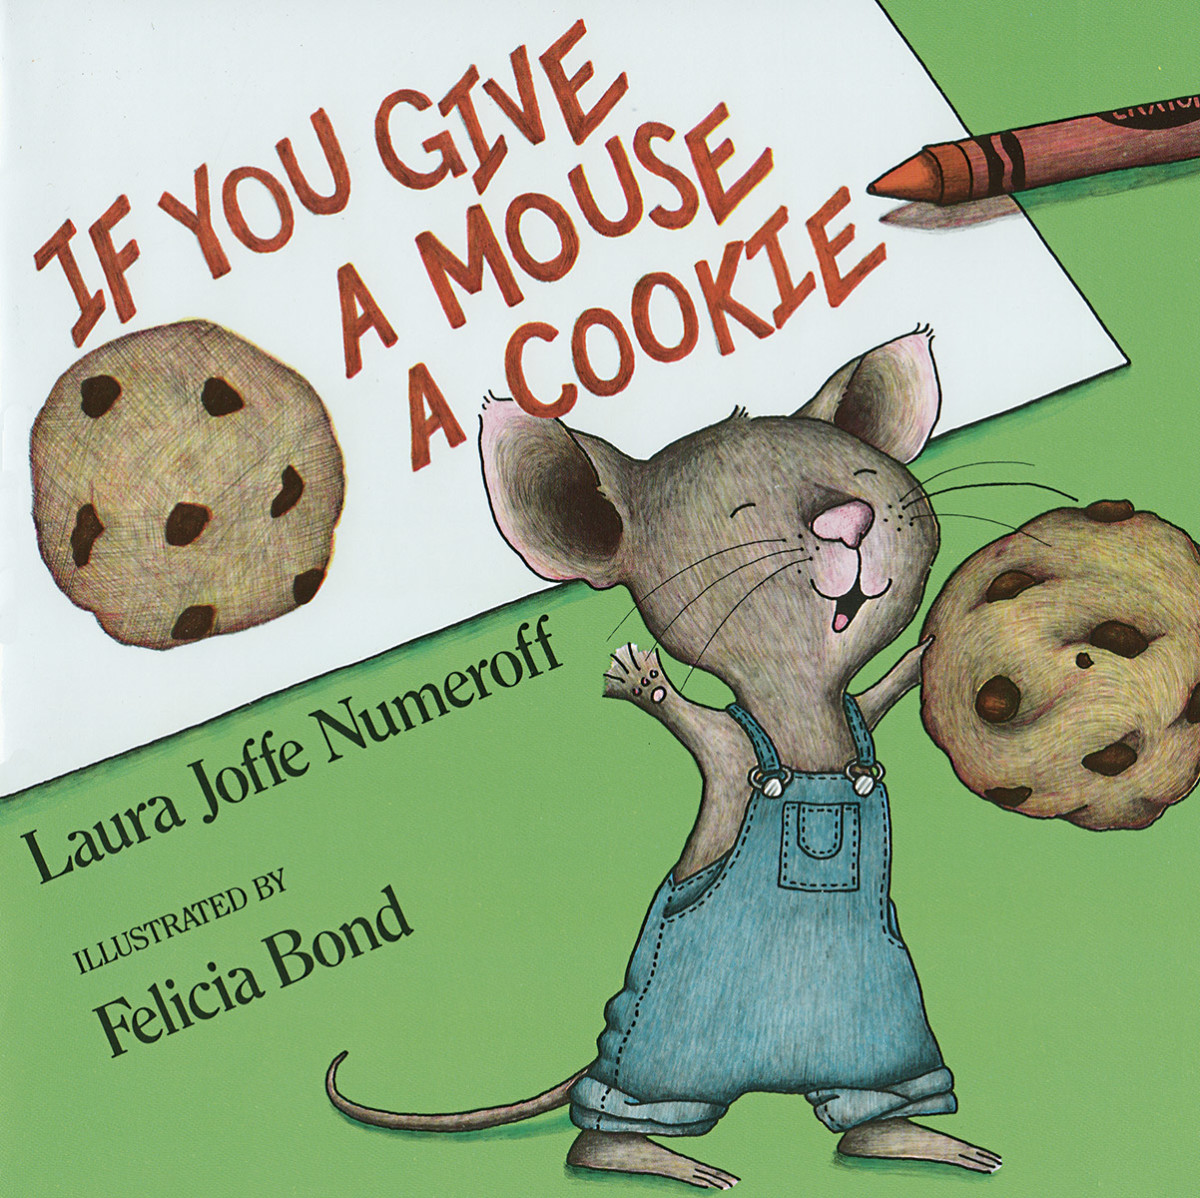 If You Give A Mouse A Cookie by Laura Numeroff